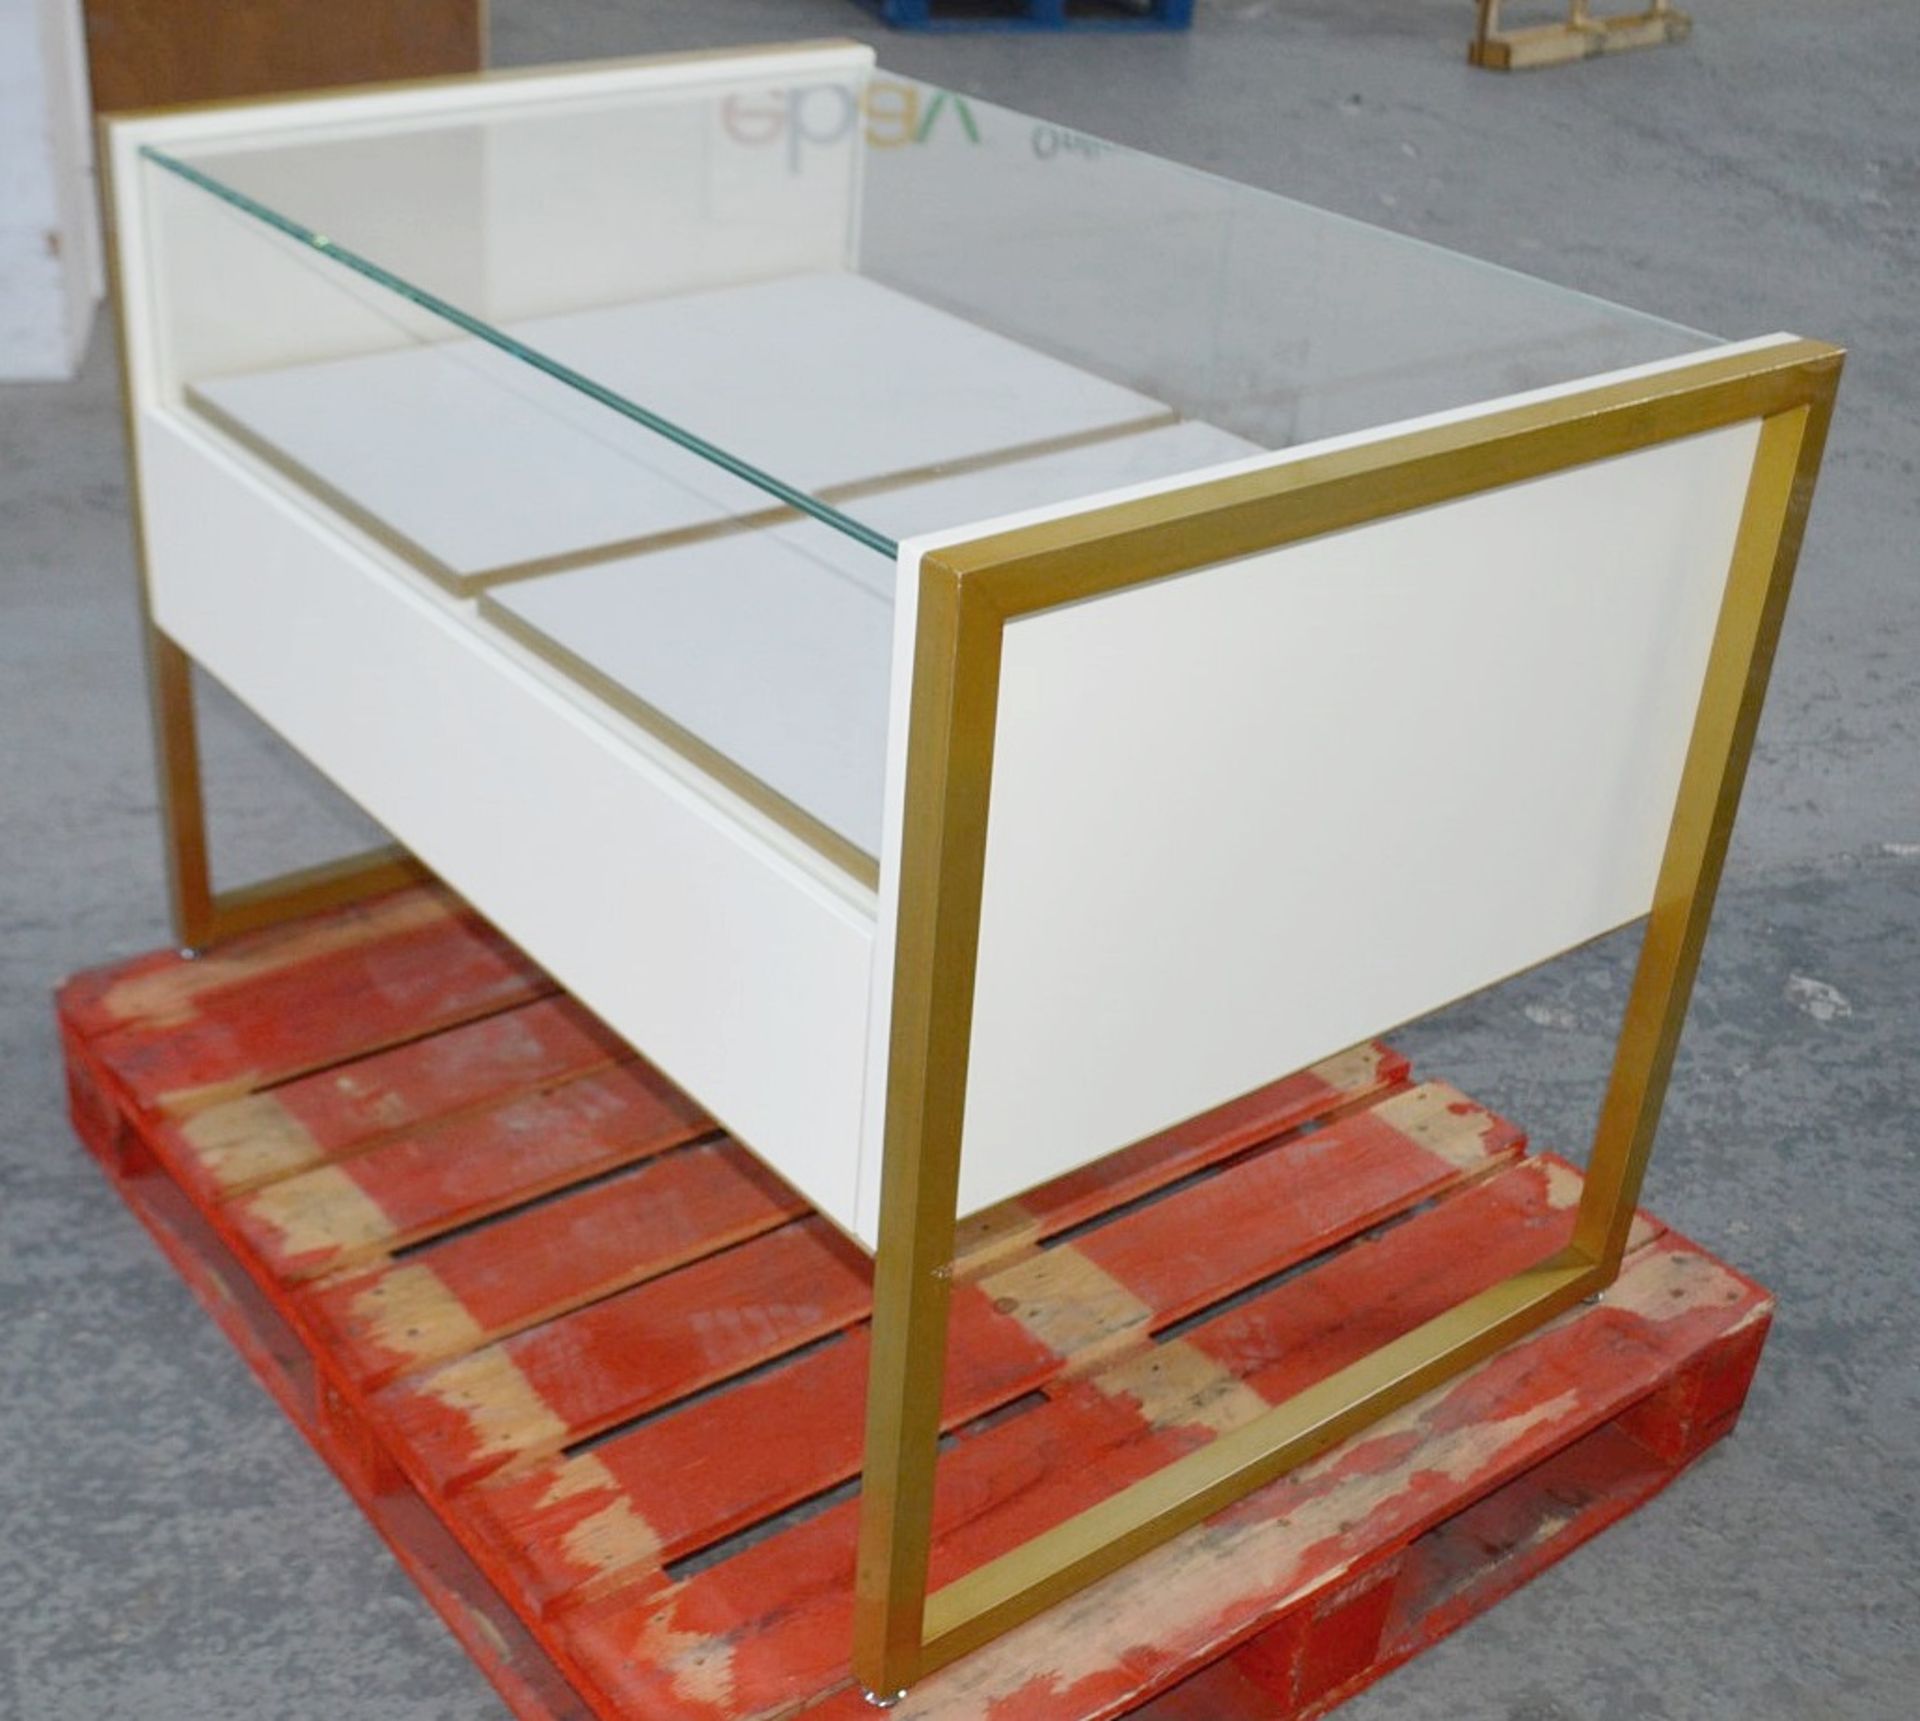 1 x Freestanding Jewellery Display Cabinet Featuring 2 x Pull-Out Trays With Leather Inserts - Image 5 of 7